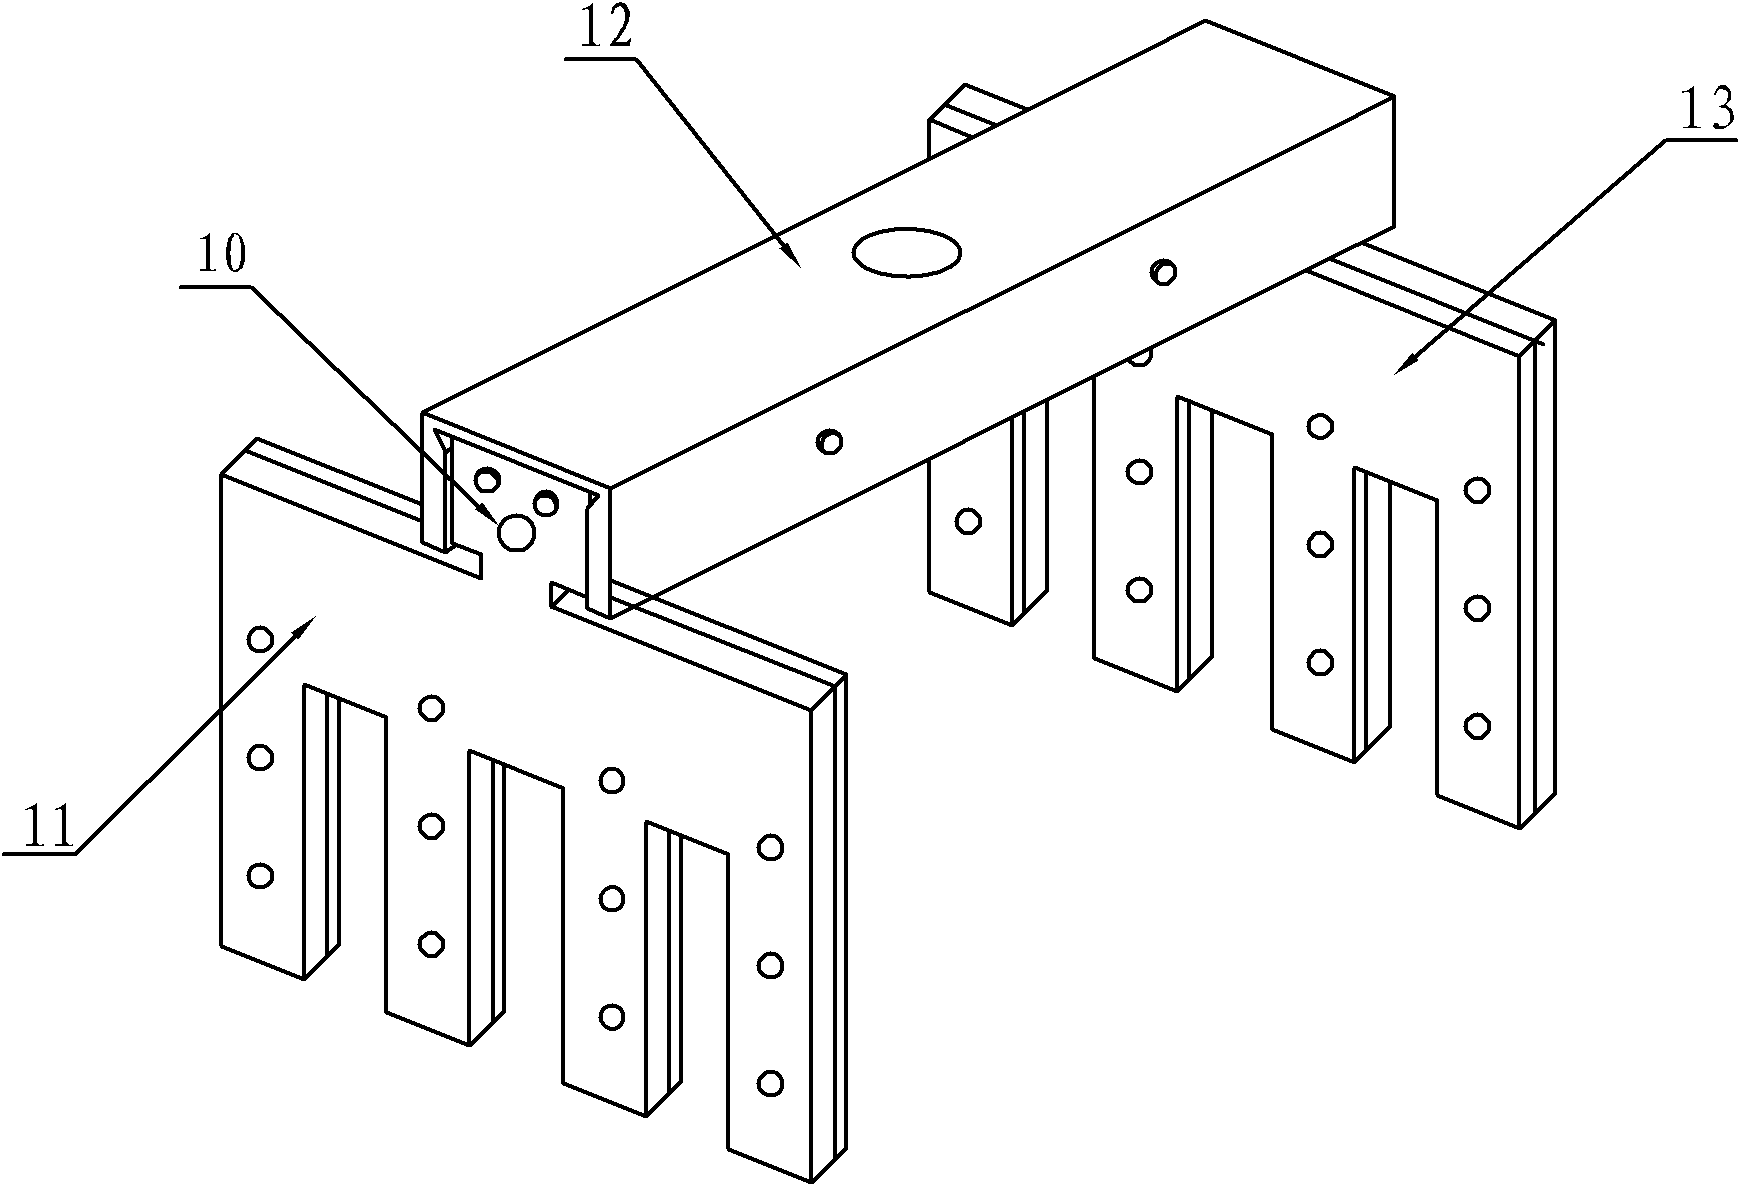 Hydraulic manipulator paw for assembling and disassembling square articles